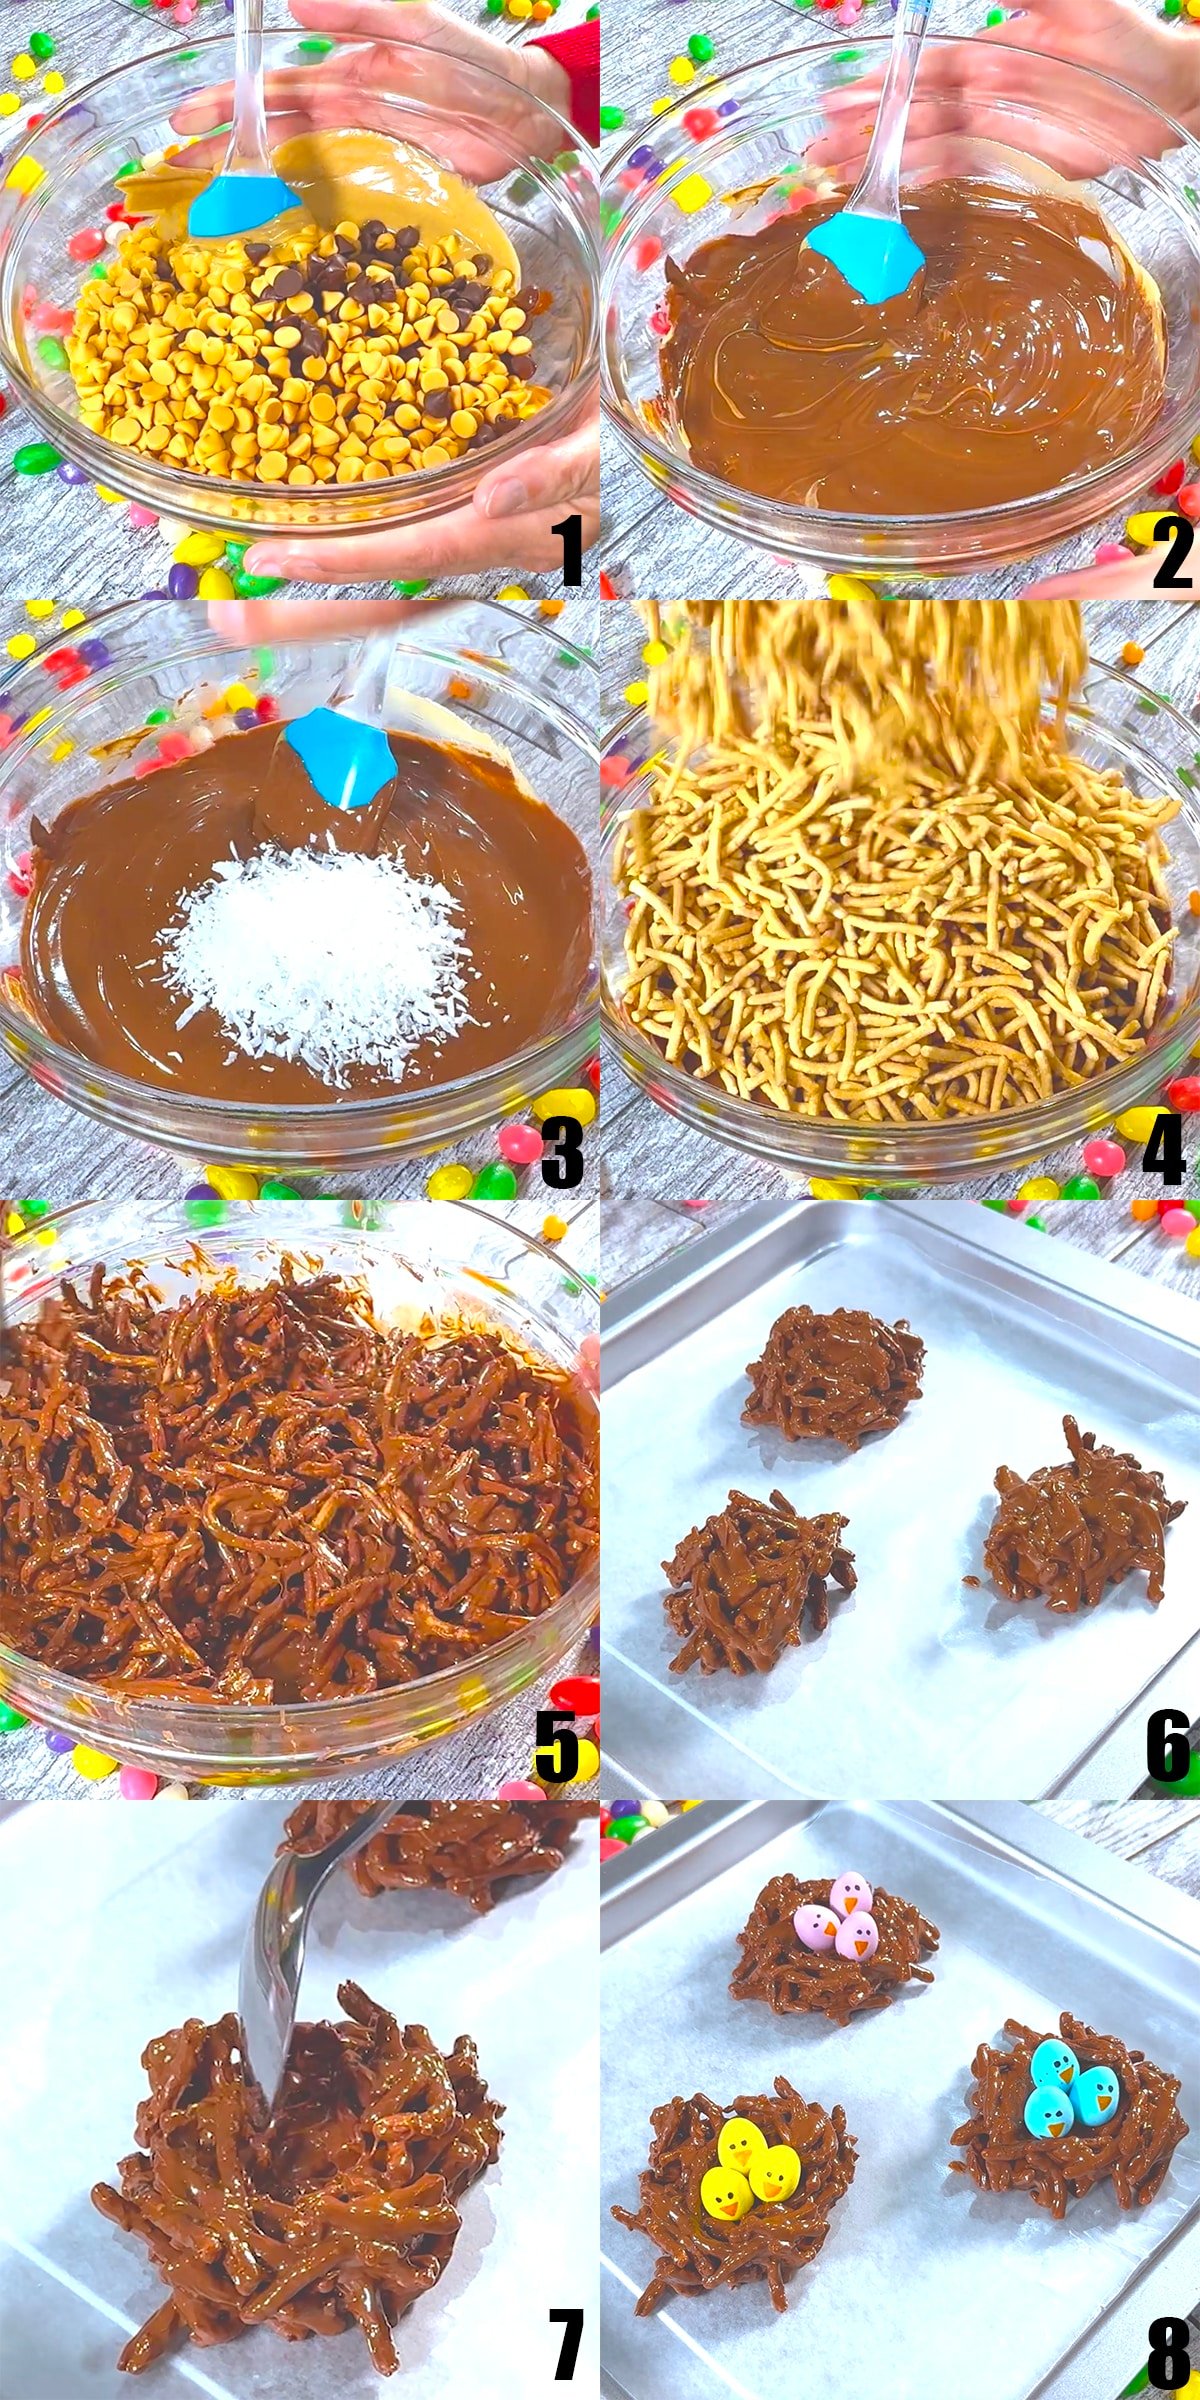 Collage Image With Step by Step Process Shots on How to Make Nest Cookies. 